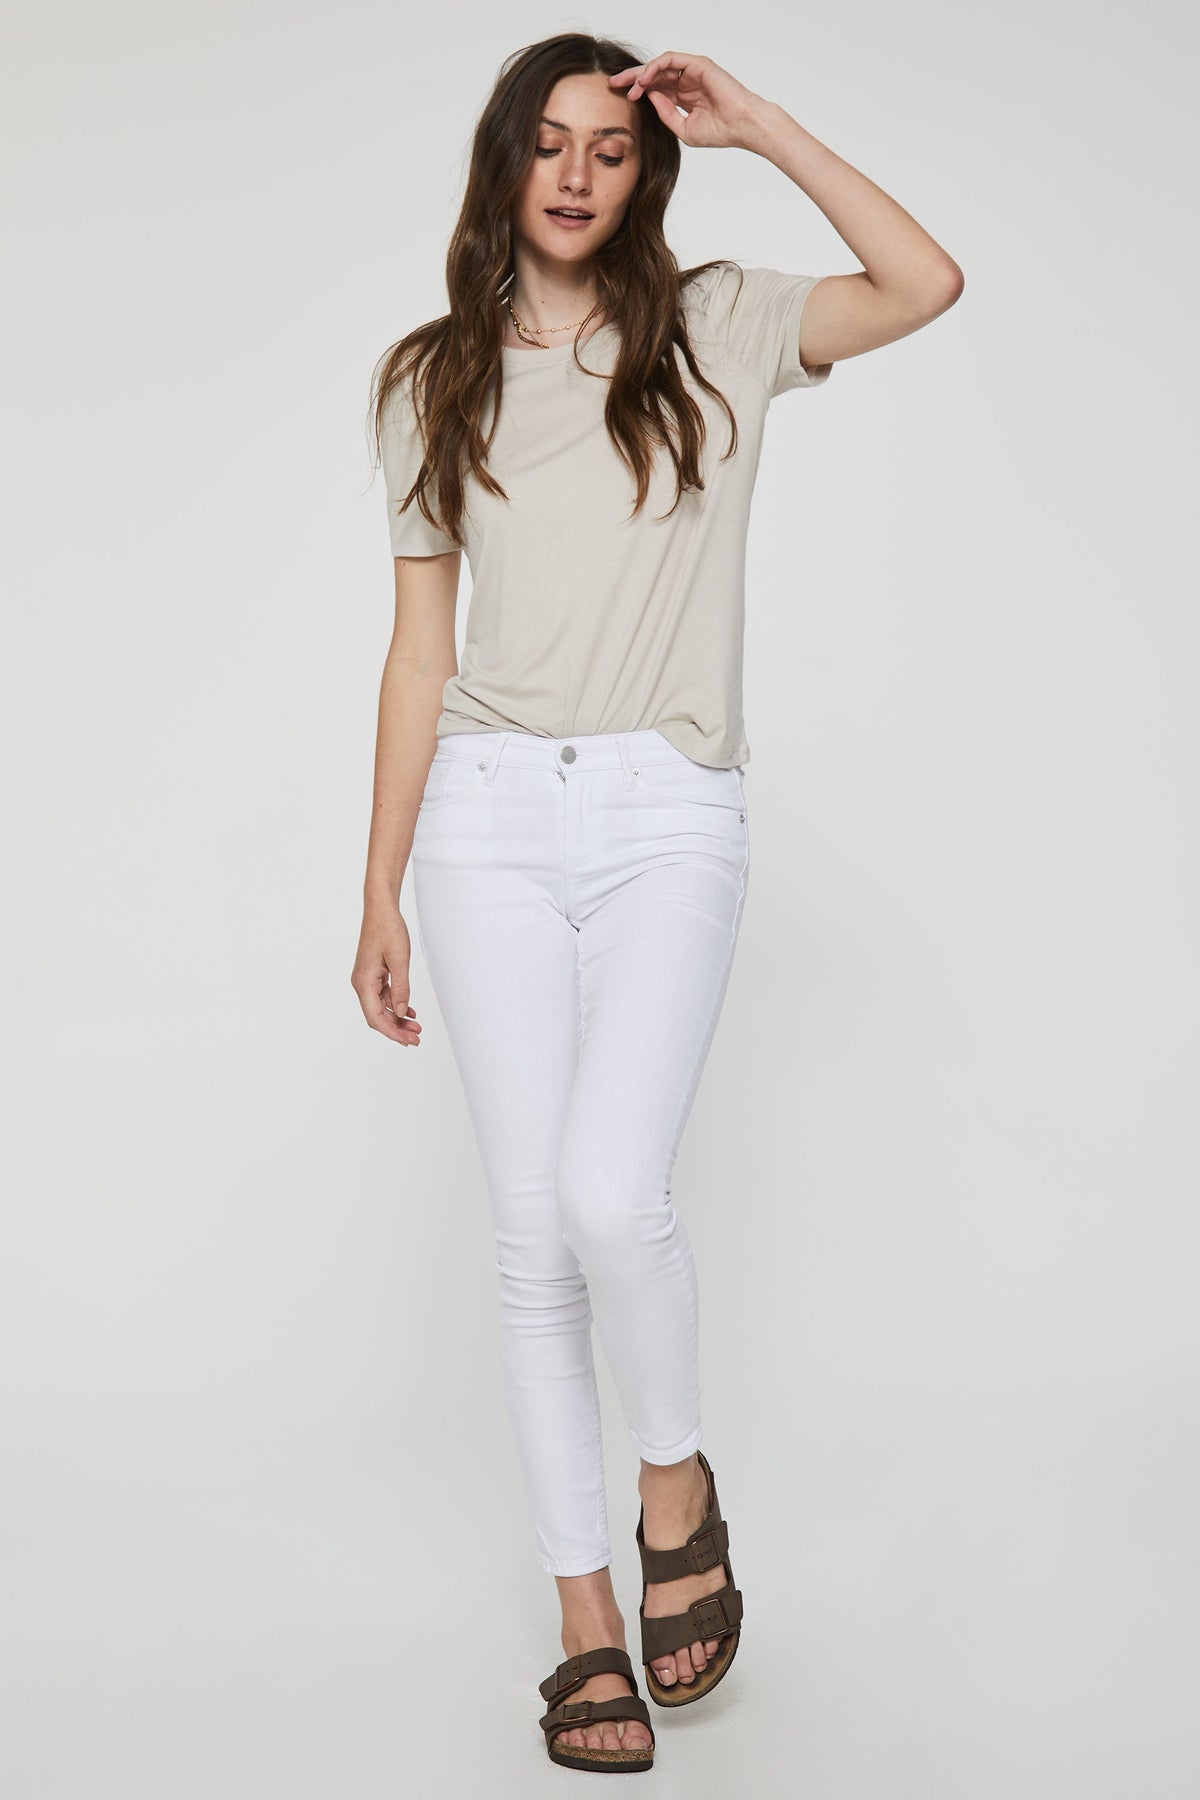 siena-rib-shirred-top-oyster-full-image-another-love-clothing